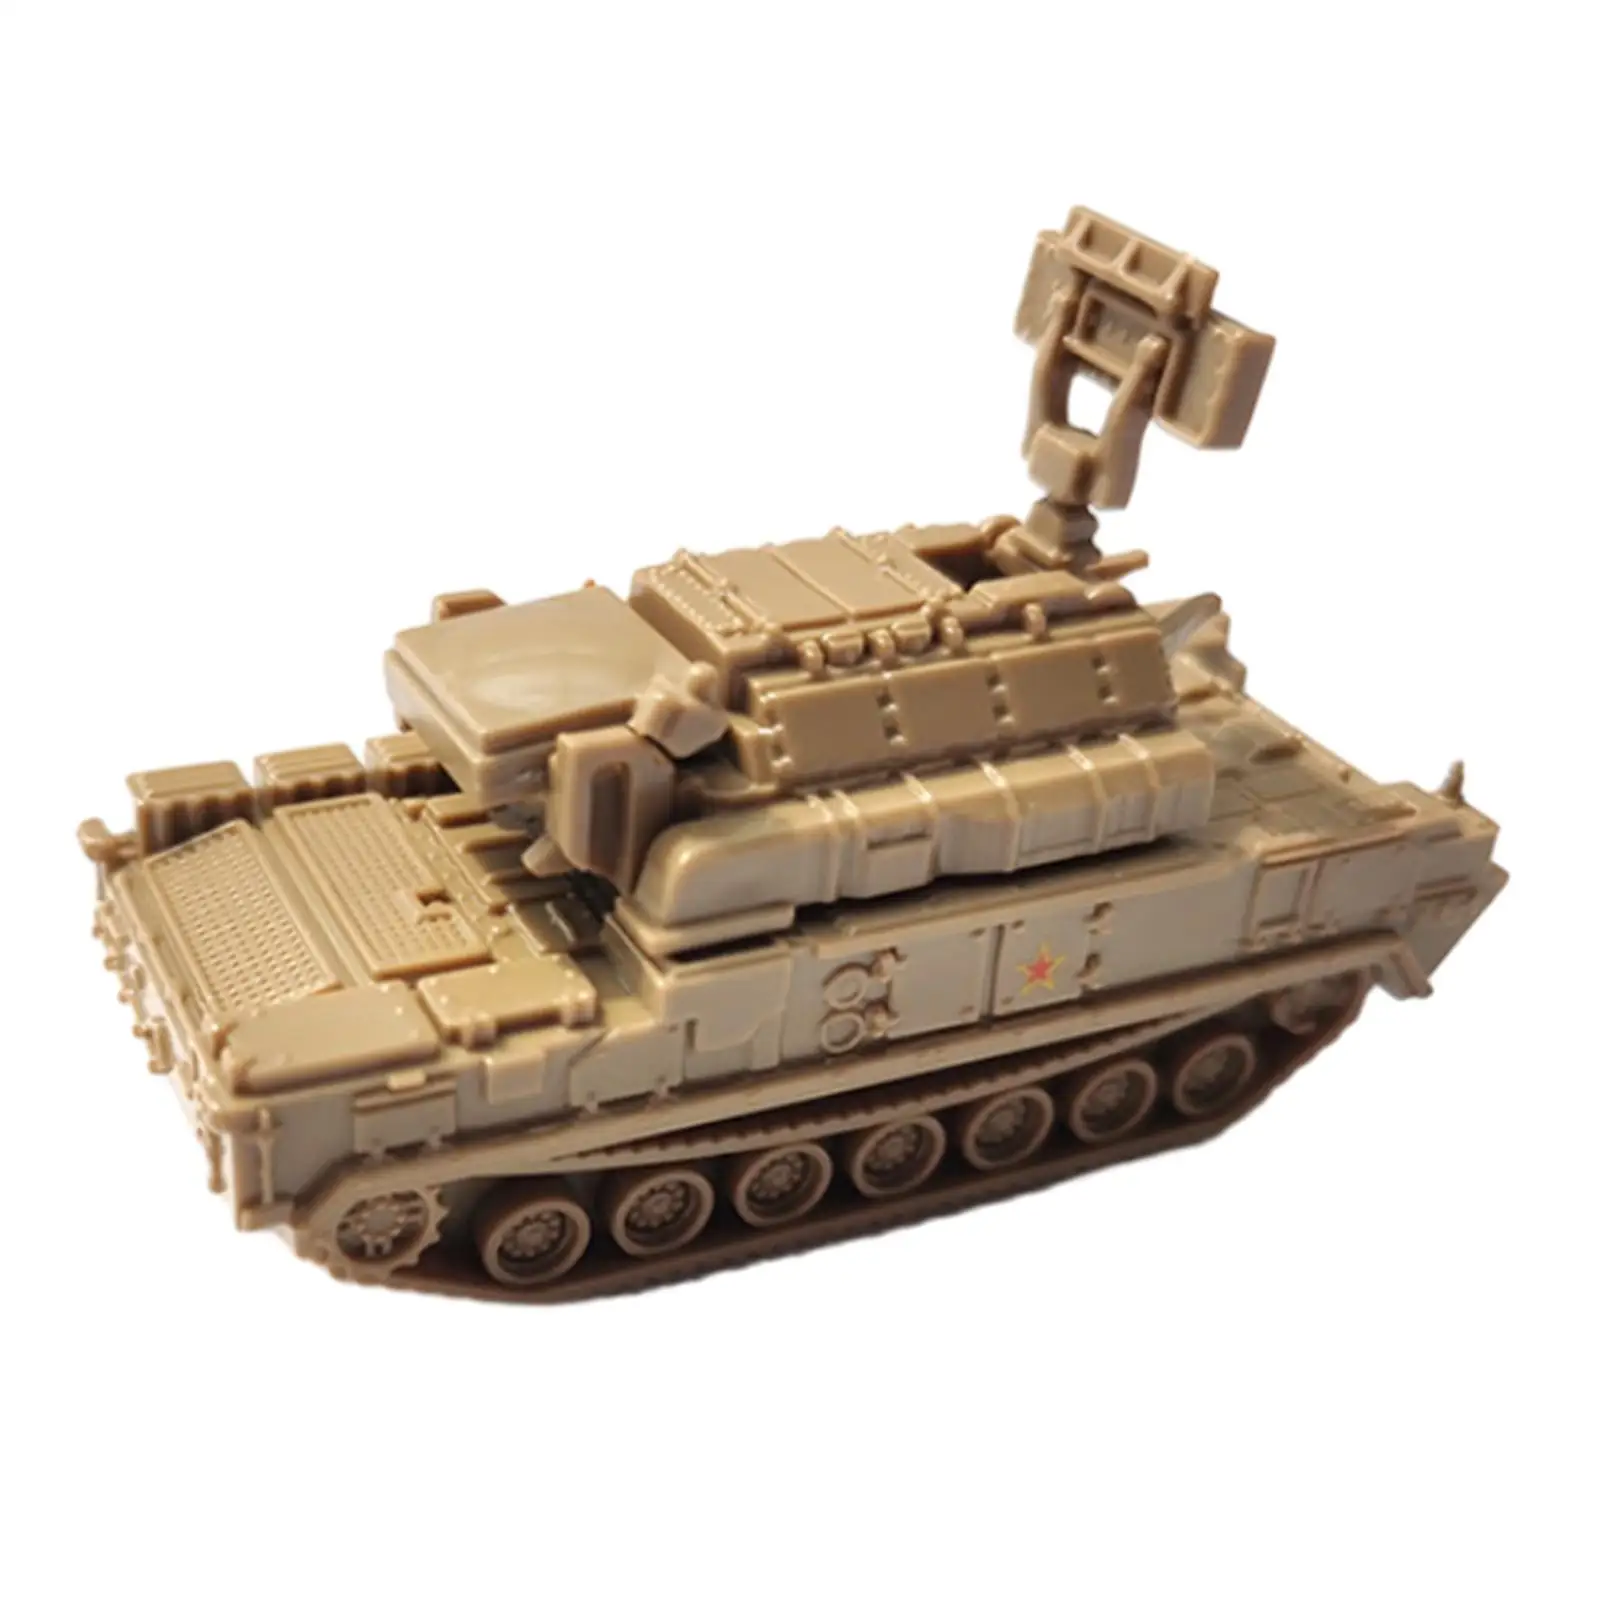 1/144 Scale Miniature Building Model Kits Puzzles DIY Assemble Armored Tank Model for Display Gift Collectibles Boys Children